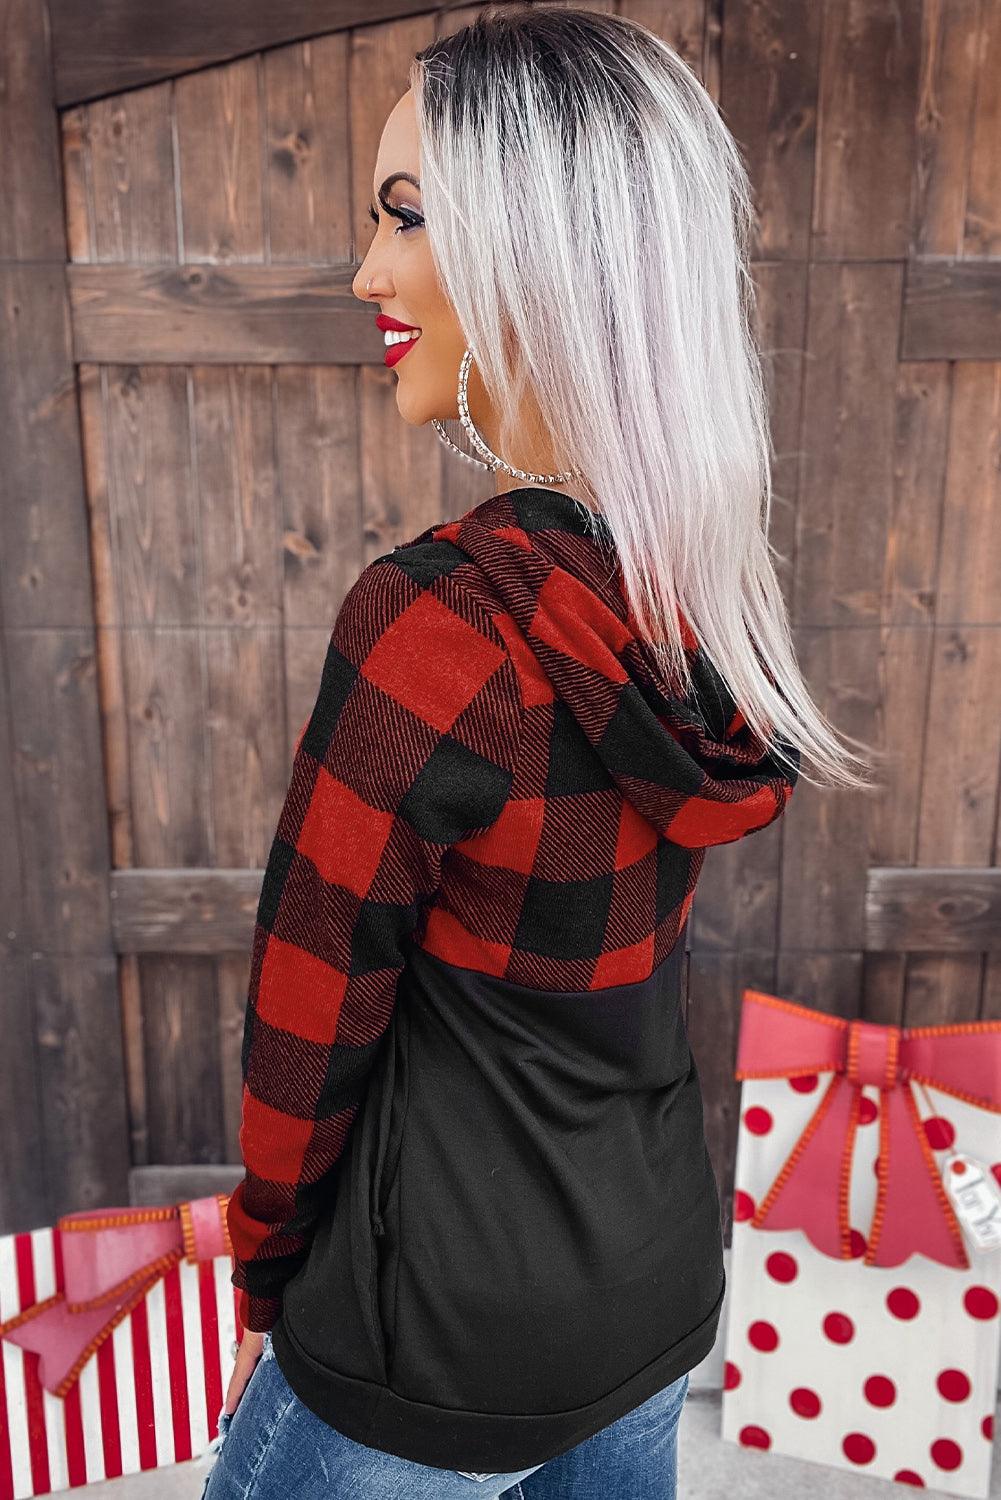 Contrast Buffalo Plaid Zip Pullover Hooded Top - L & M Kee, LLC